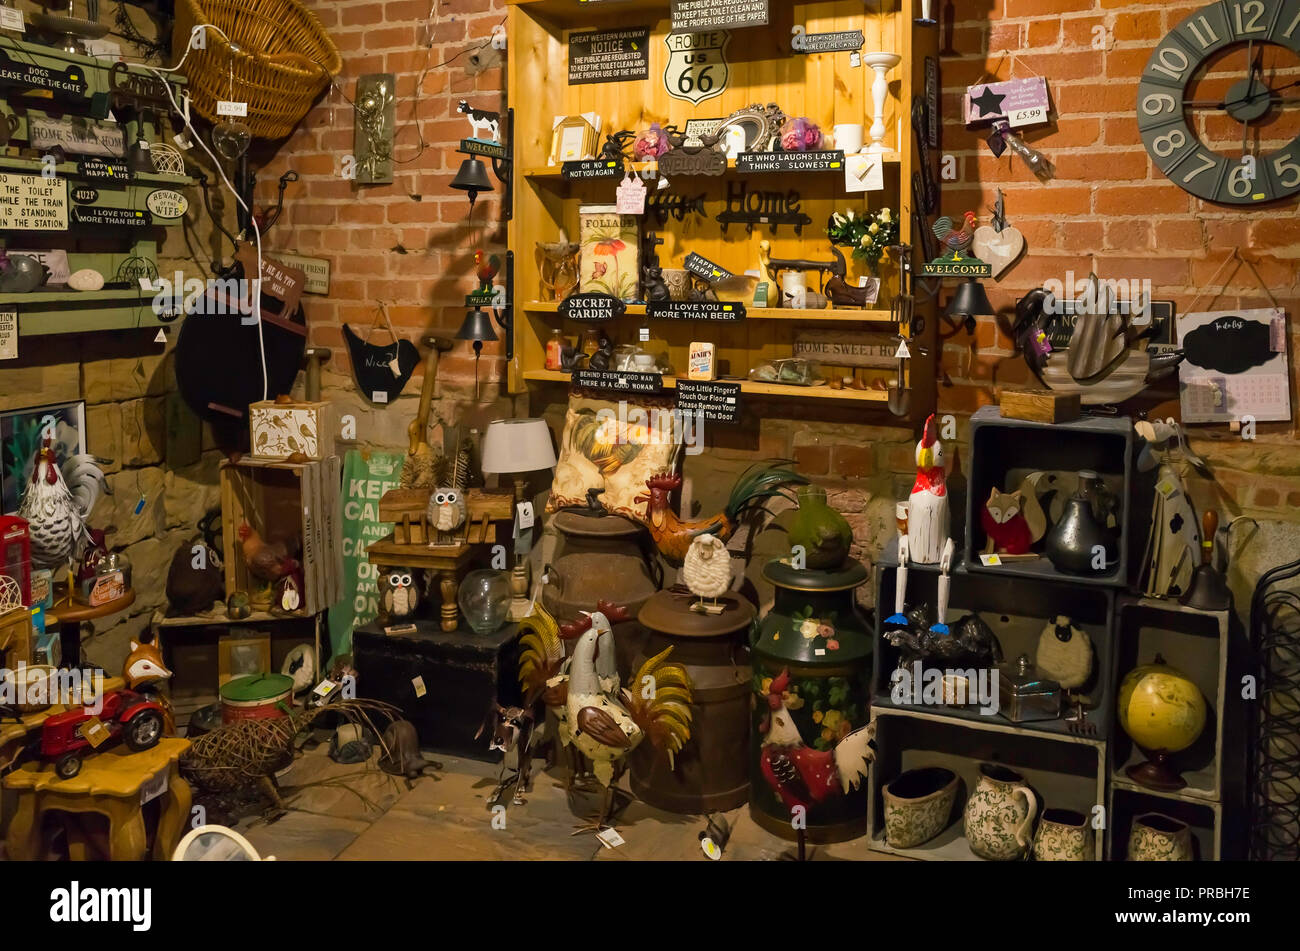 Interior of a rural garden centre and antique shop with a collection of vintage and reproduction garden tools ornaments and bric a brac Stock Photo